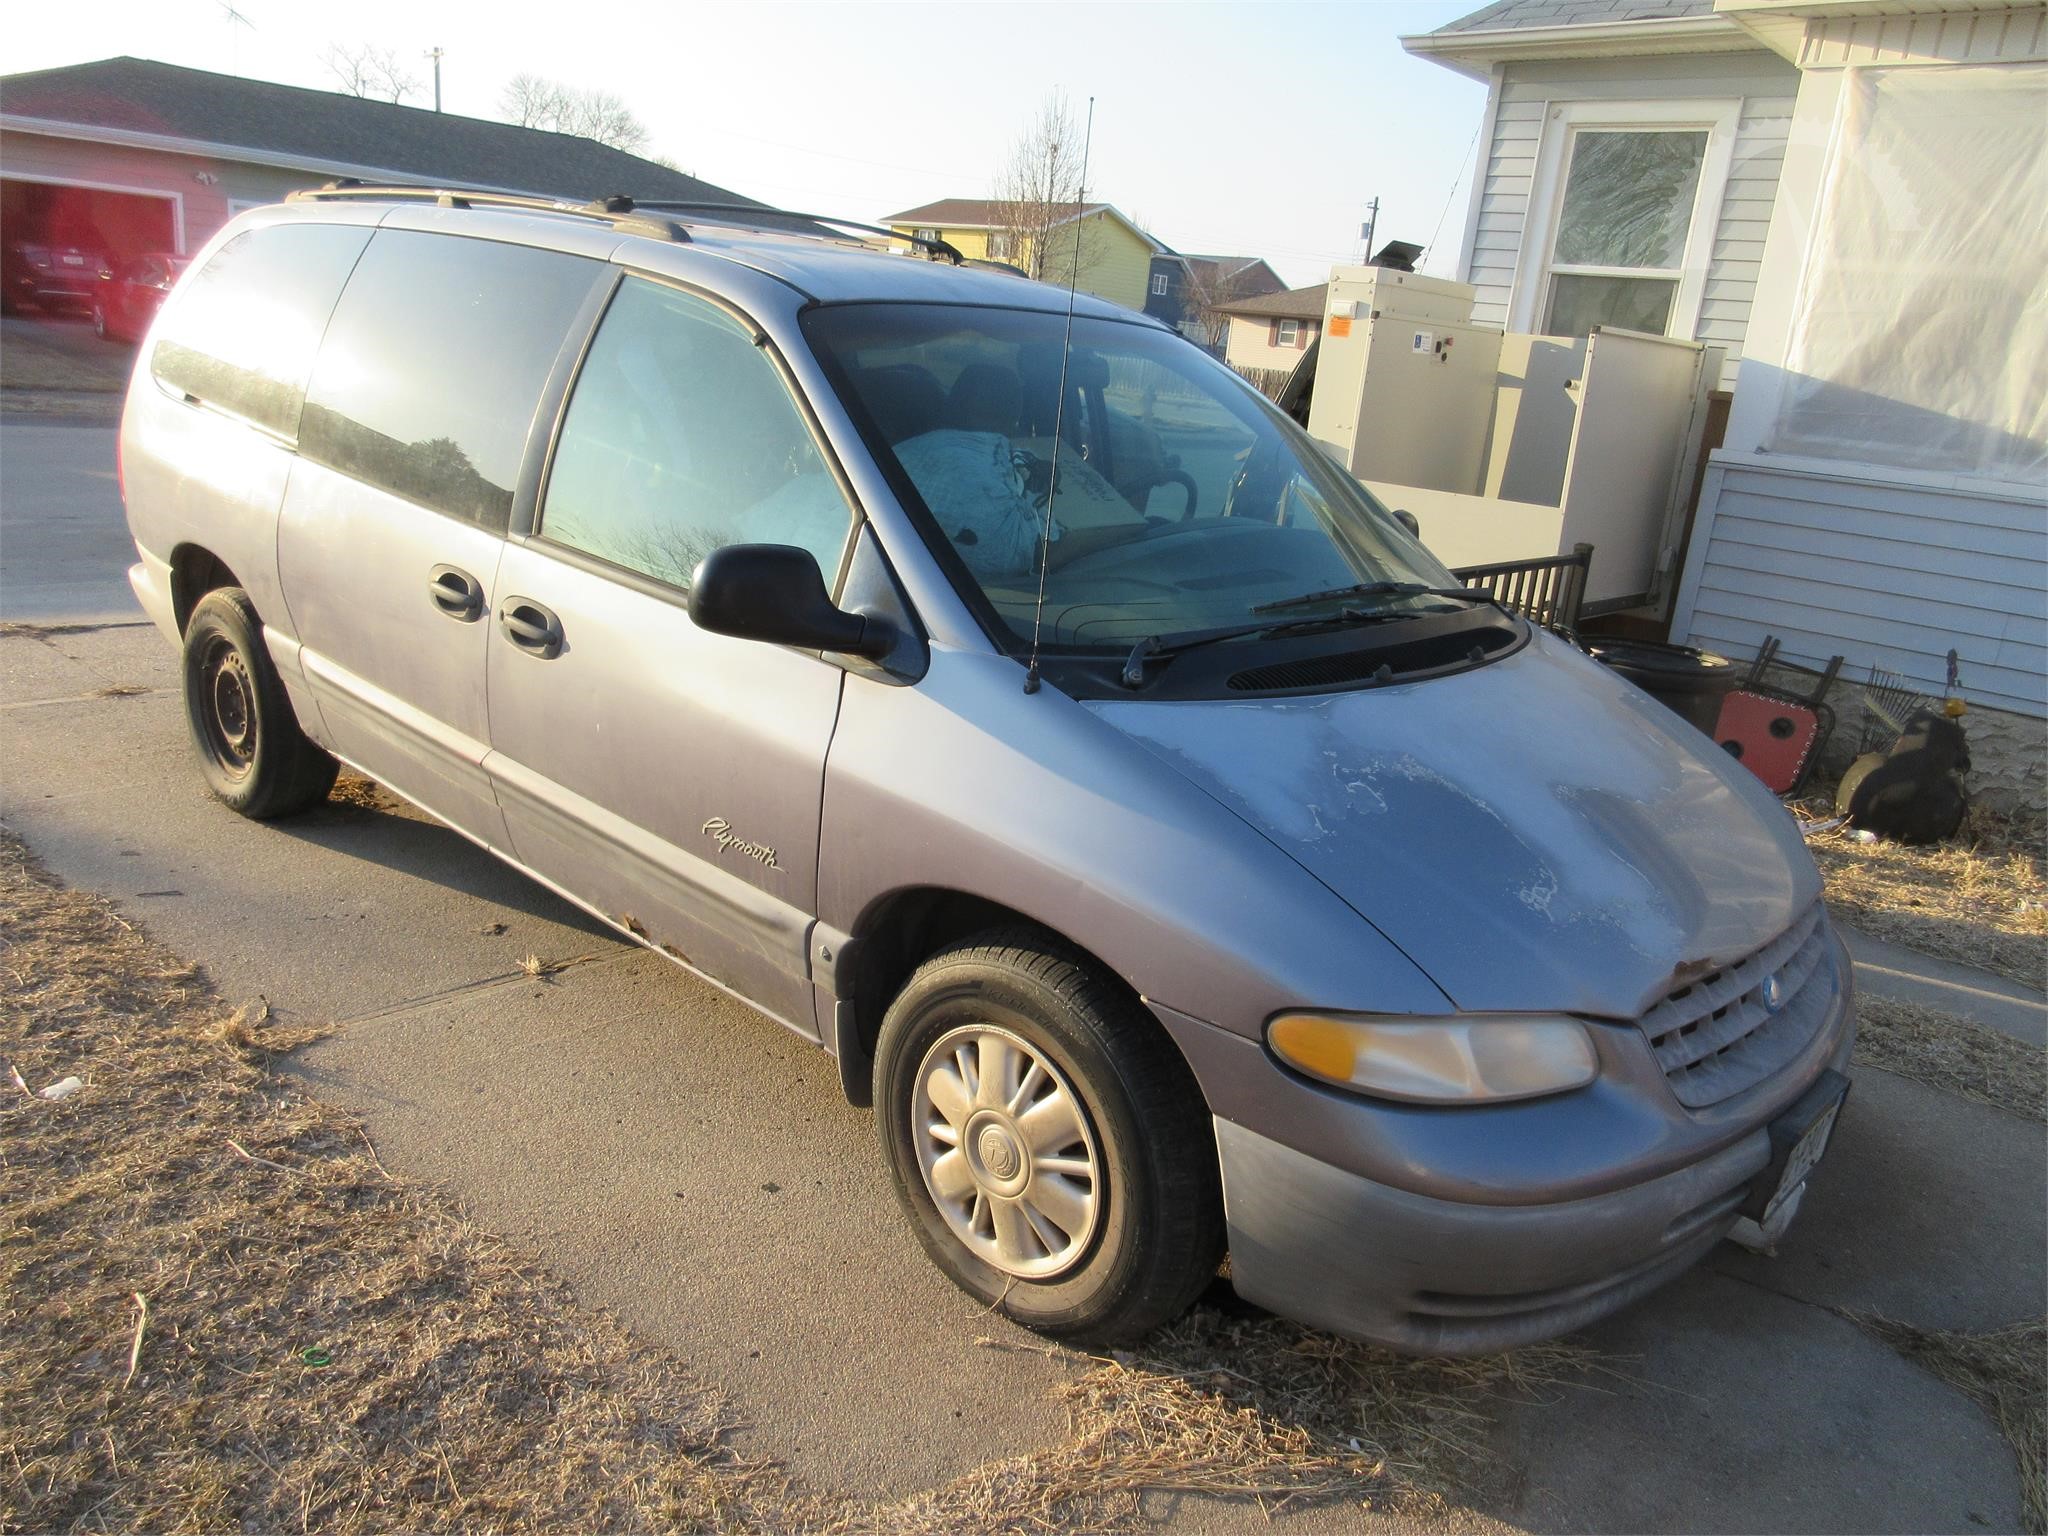 1998 PLYMOUTH GRAND VOYAGER | Online Auctions | AuctionTime.com